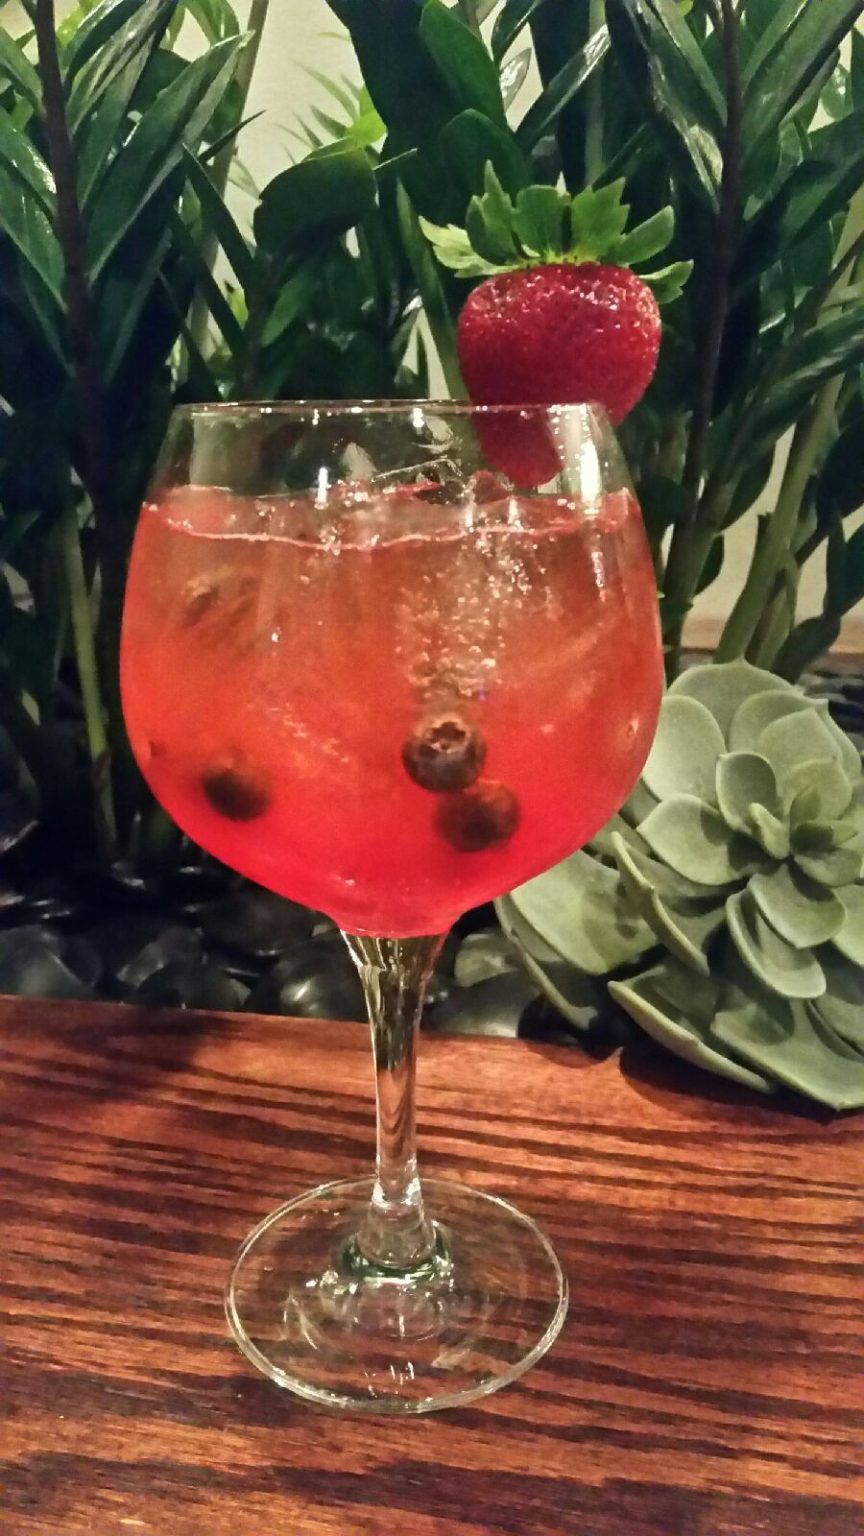 4th of July Cocktails from Sonesta's Talented Chefs - A blog from Sonesta